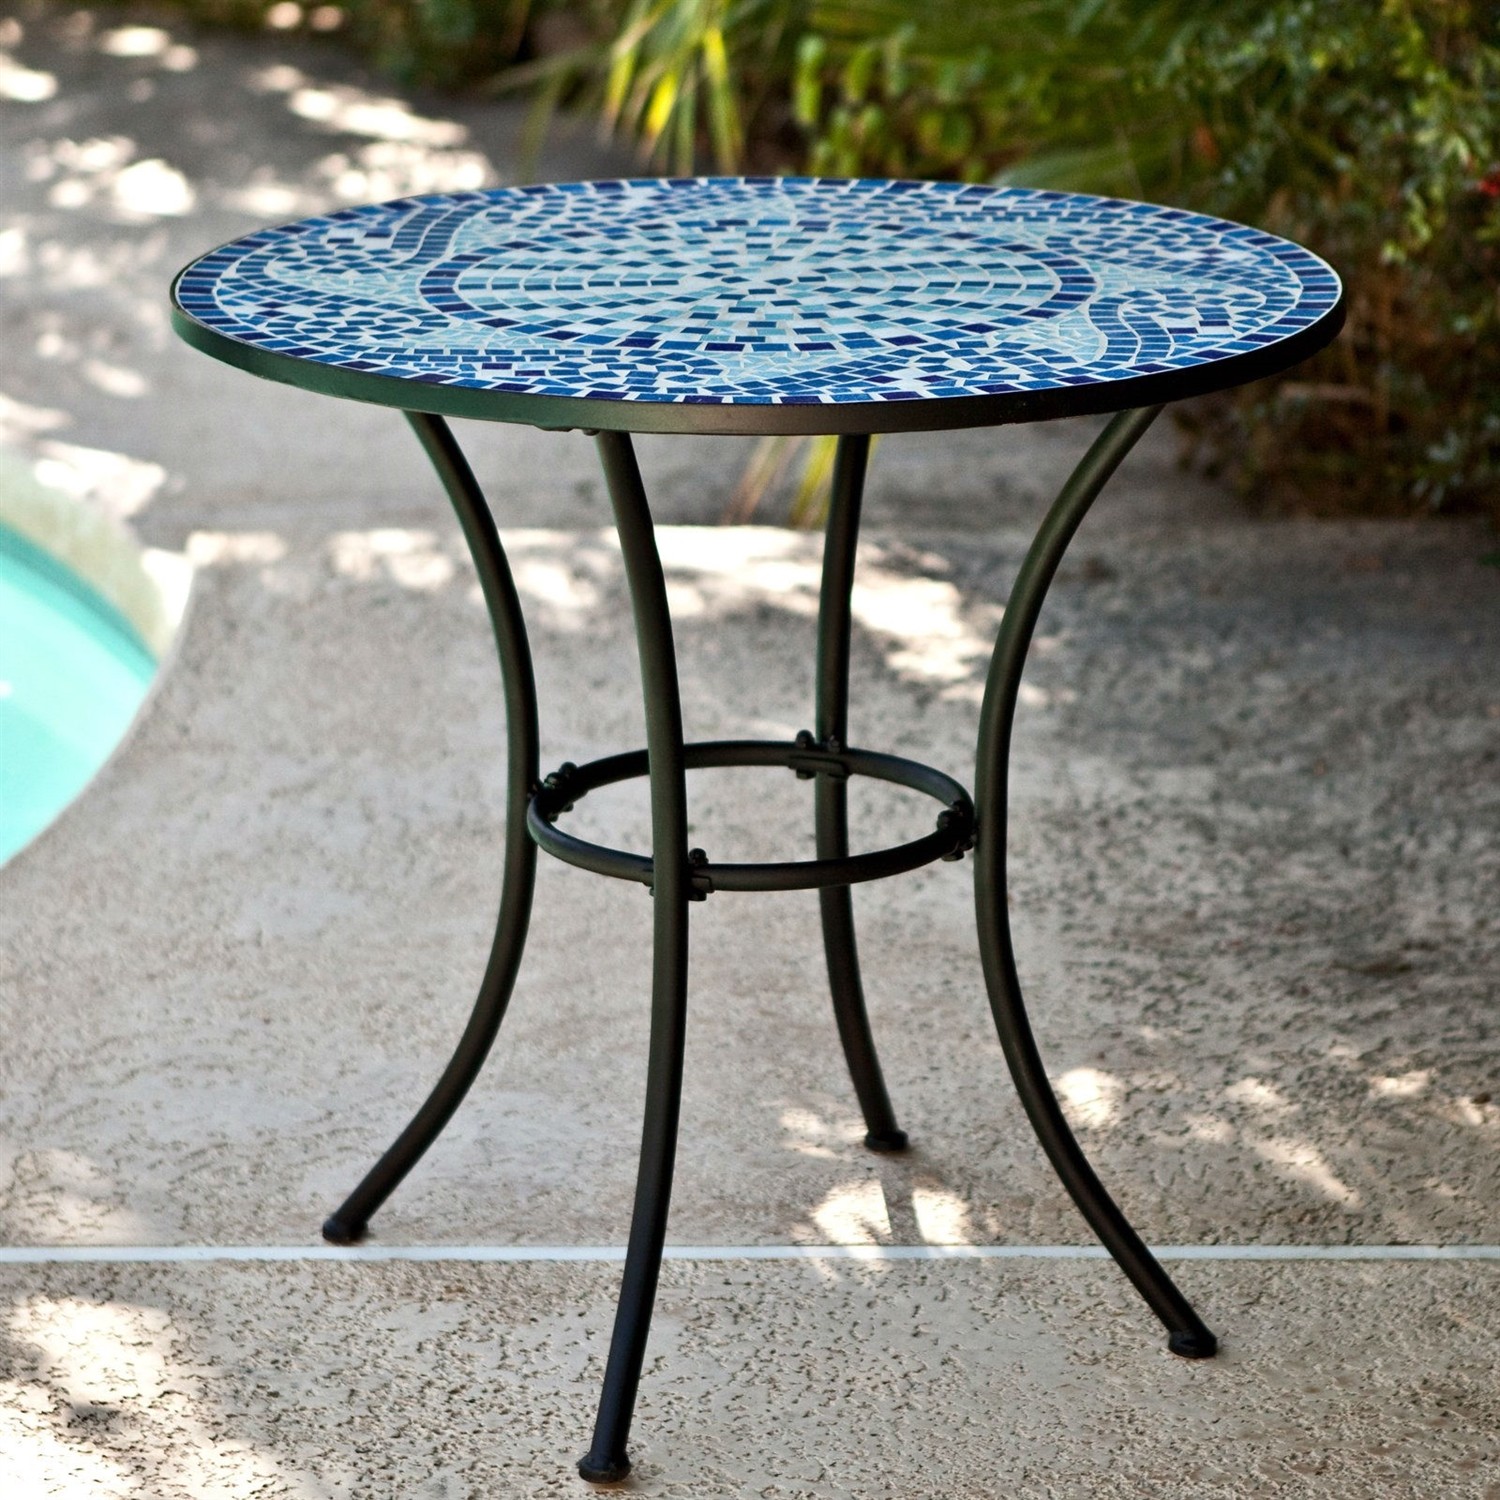 30 inch round metal outdoor bistro patio table with hand